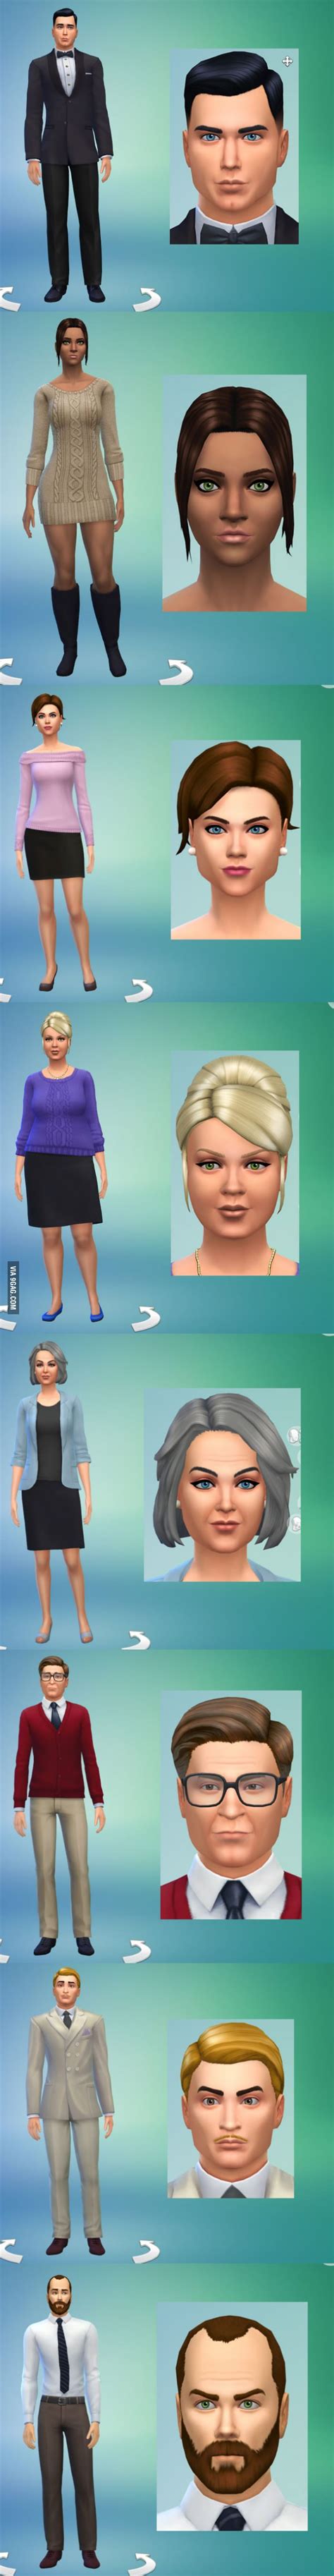 Archer Cast Done In The Sims 4 Character Creator New Memes Funny Memes